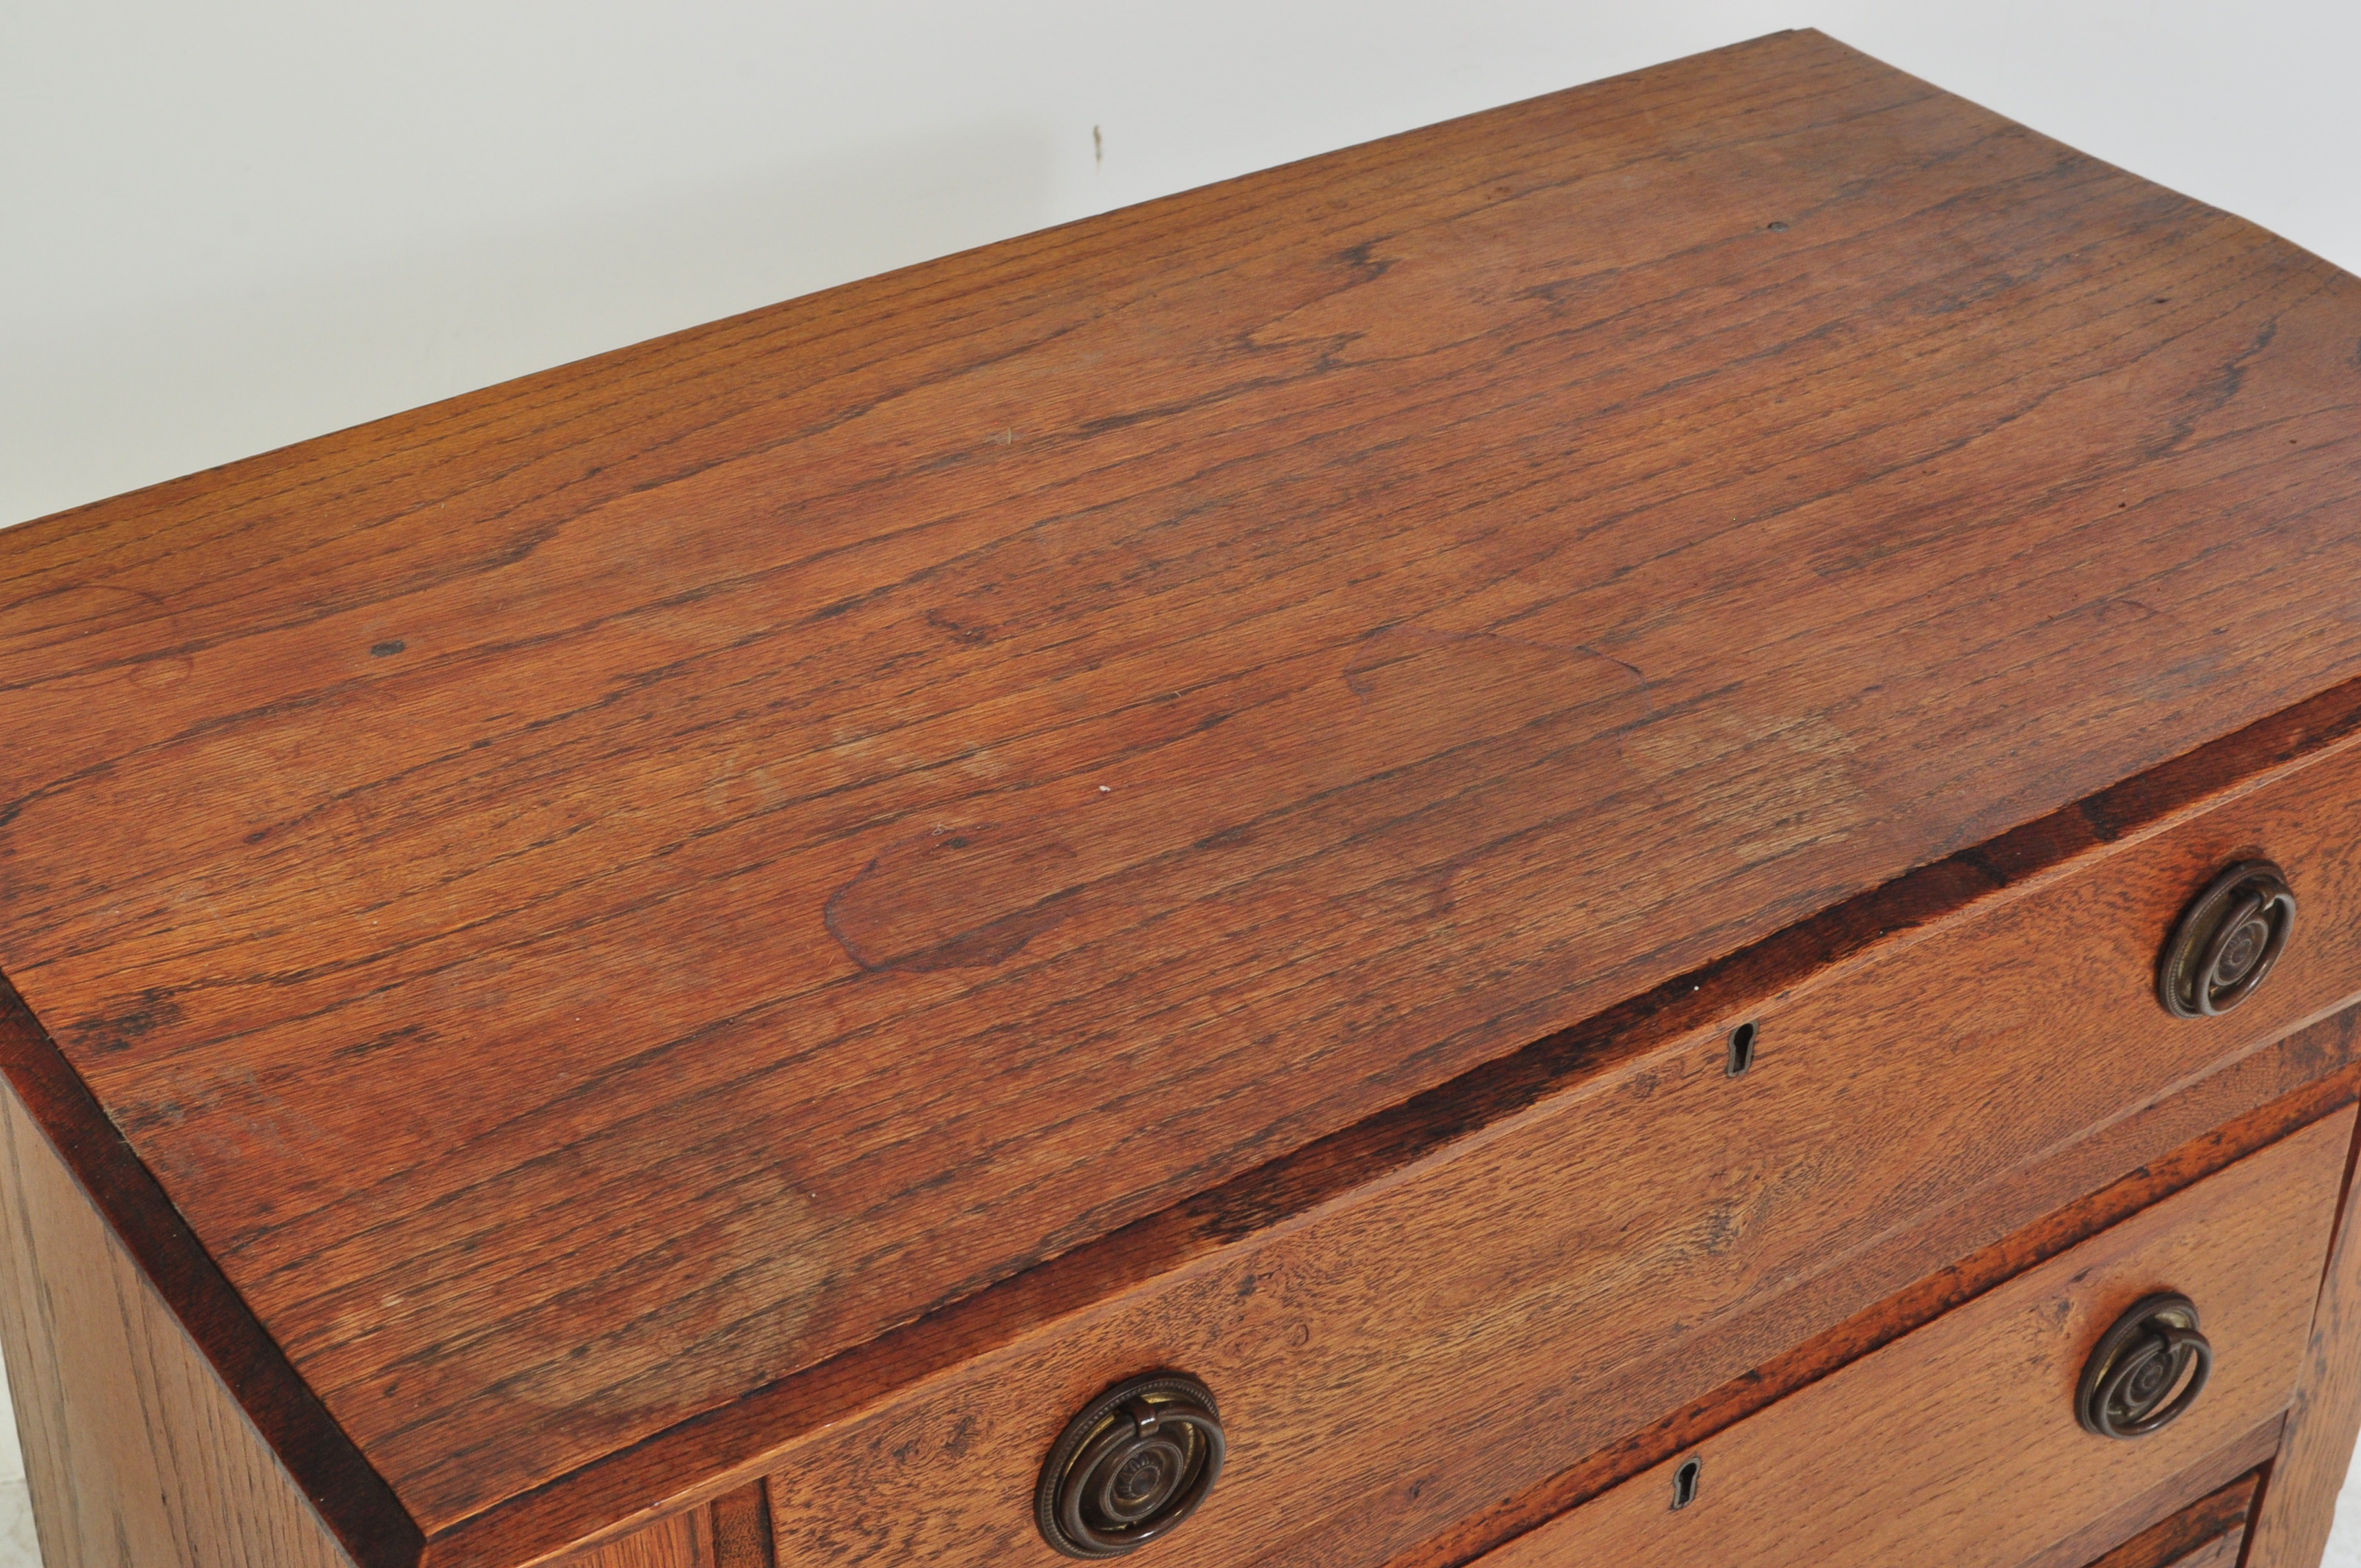 EARLY 20TH CENTURY OAK ARTS AND CRAFTS CHEST OF DRAWERS - Image 3 of 6